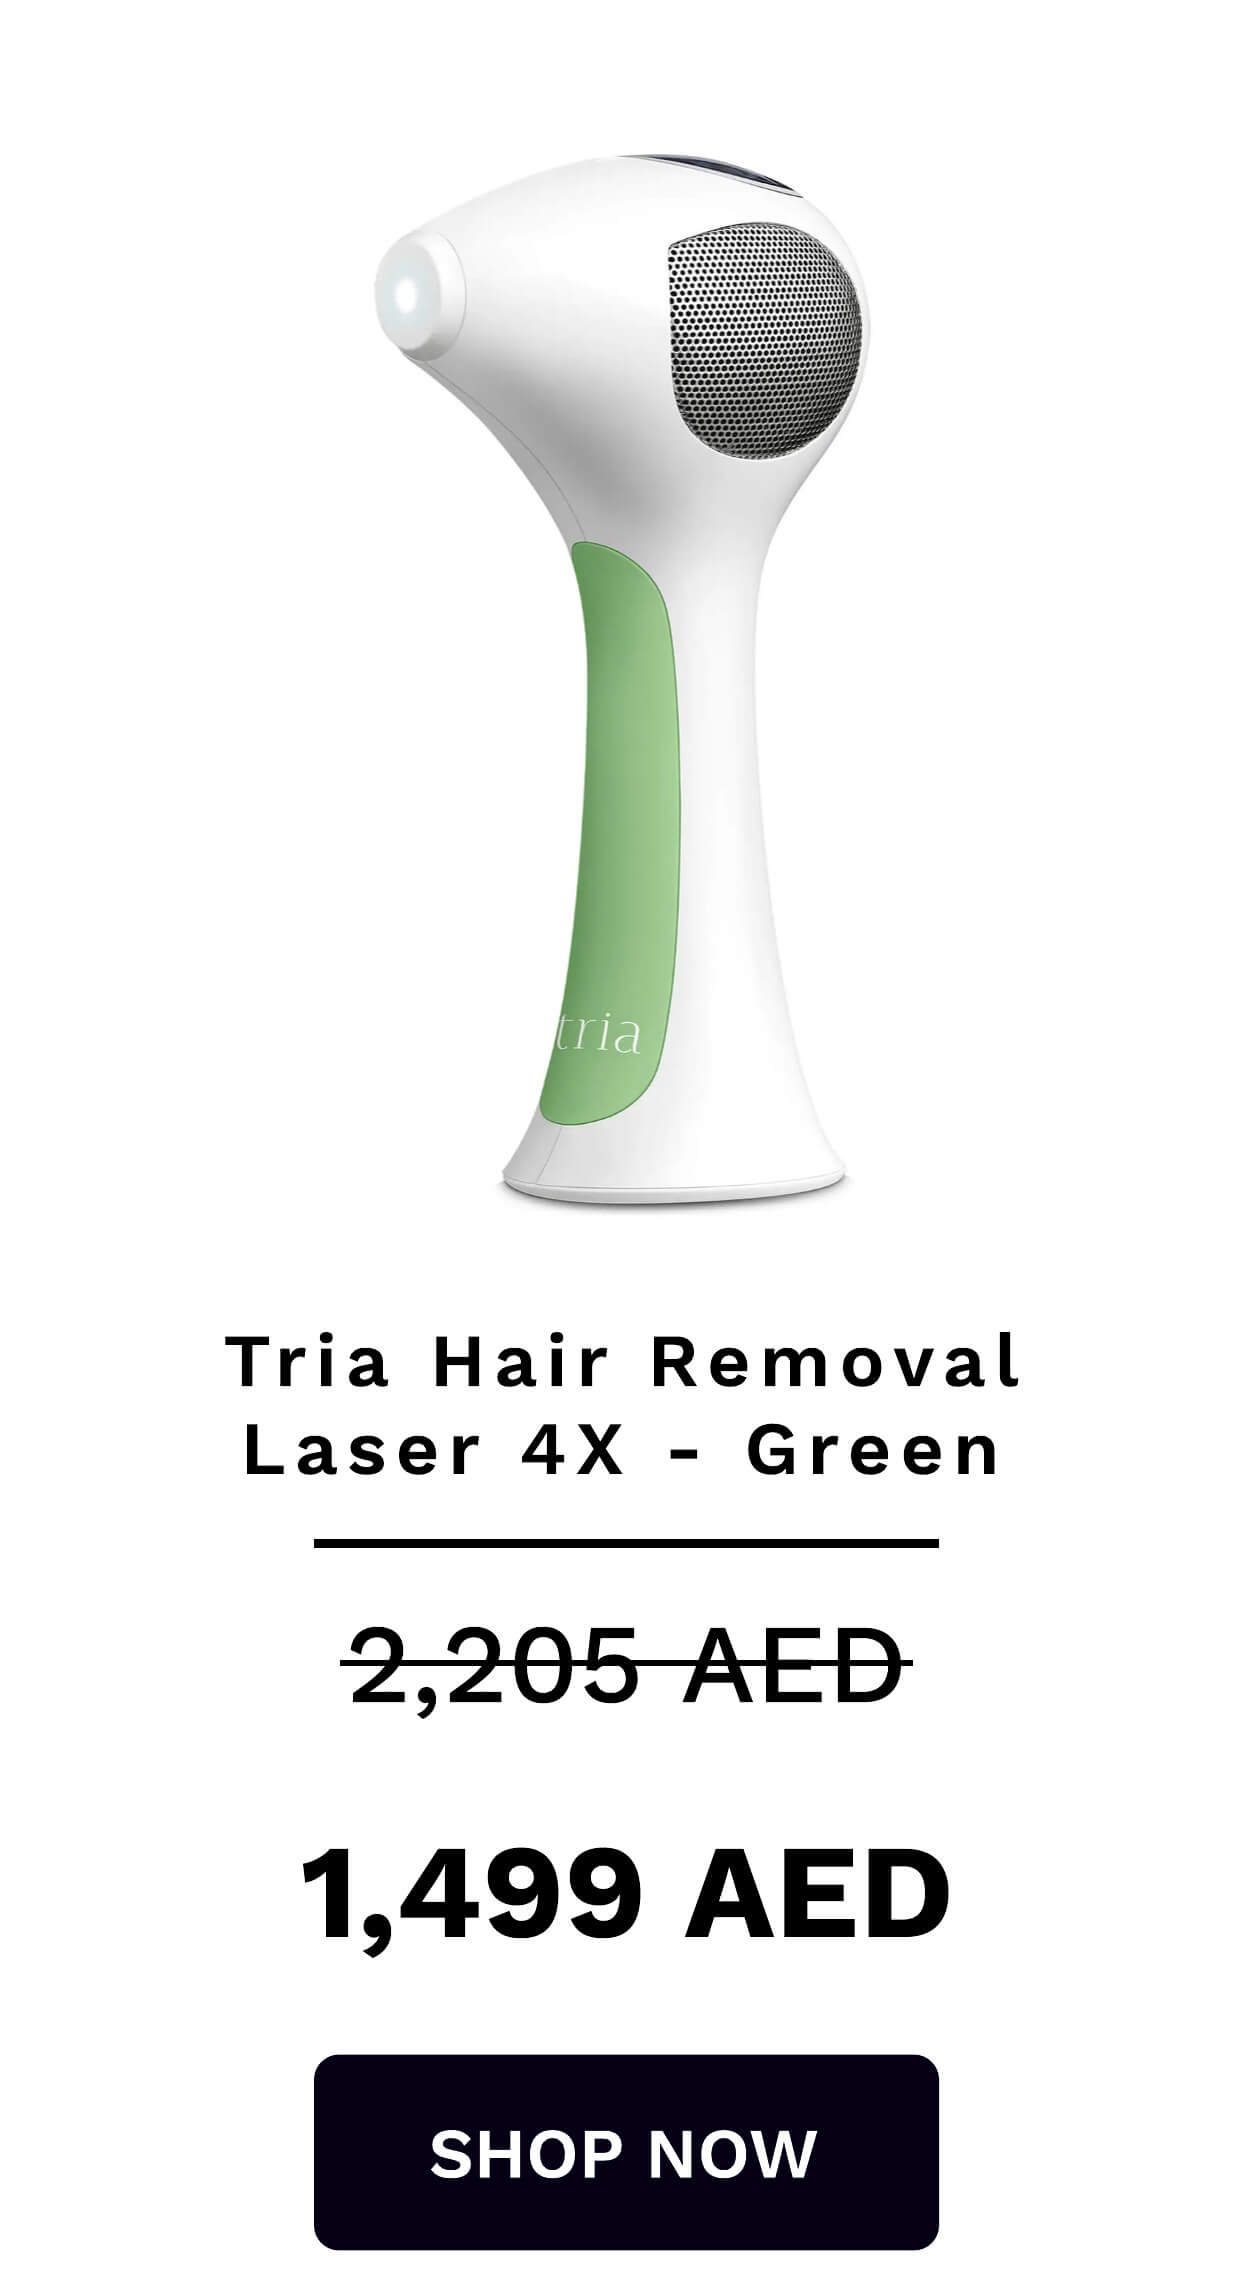  Tria Hair Removal Laser 4X - Green 2,205-AED 1,499 AED SHOP NOW 